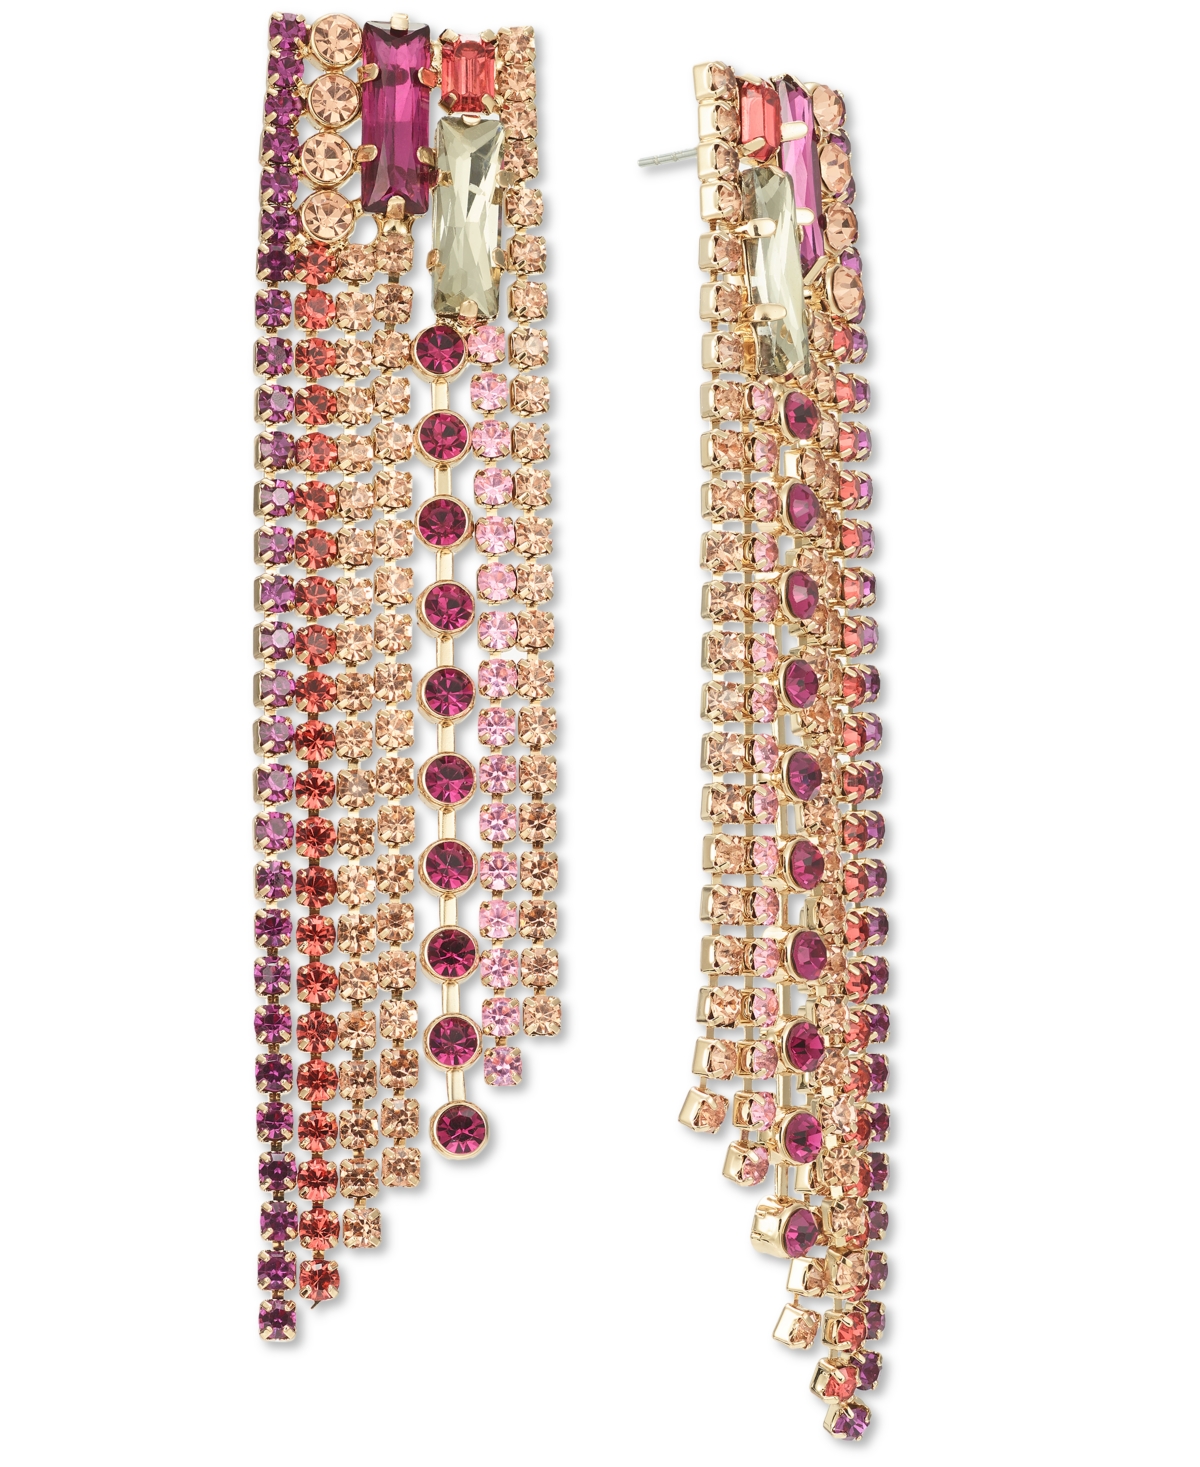 Gold-Tone Mixed Color Crystal Fringe Statement Earrings, Created for Macy's - Multi